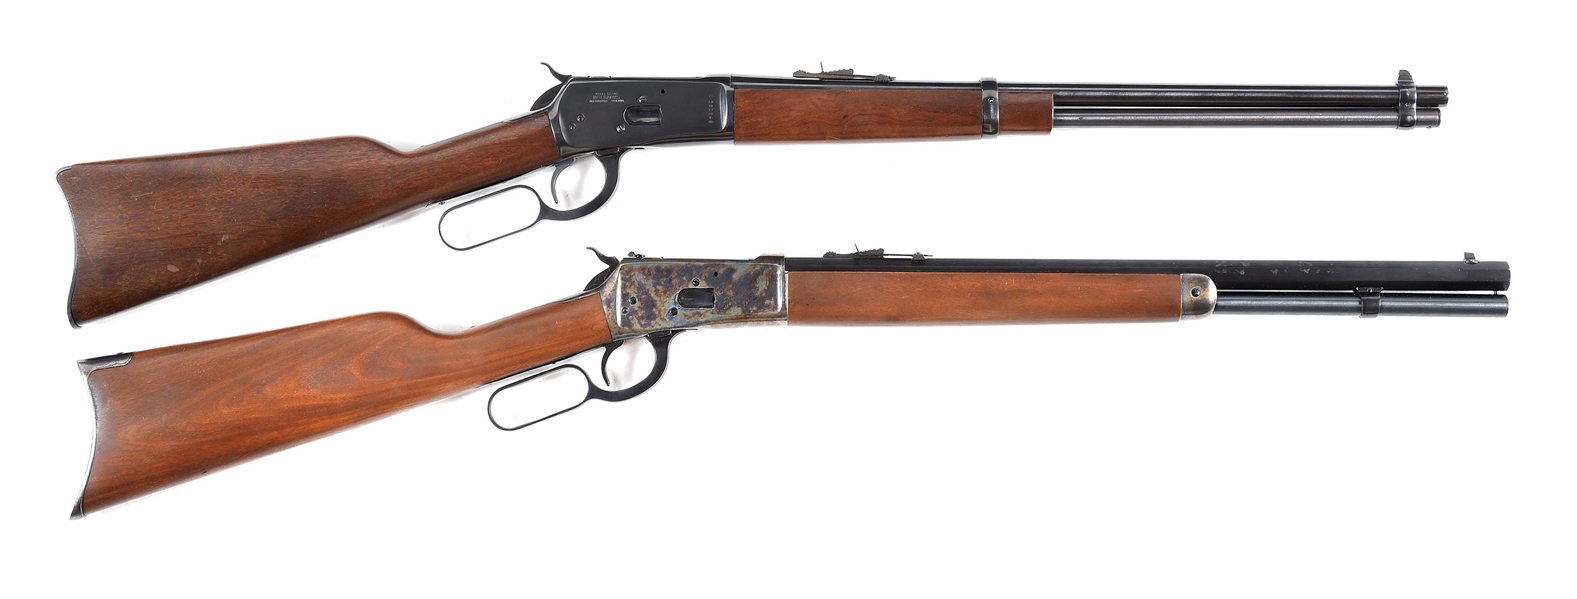 (M) LOT OF 2: ROSSI 92 LEVER ACTION RIFLES.